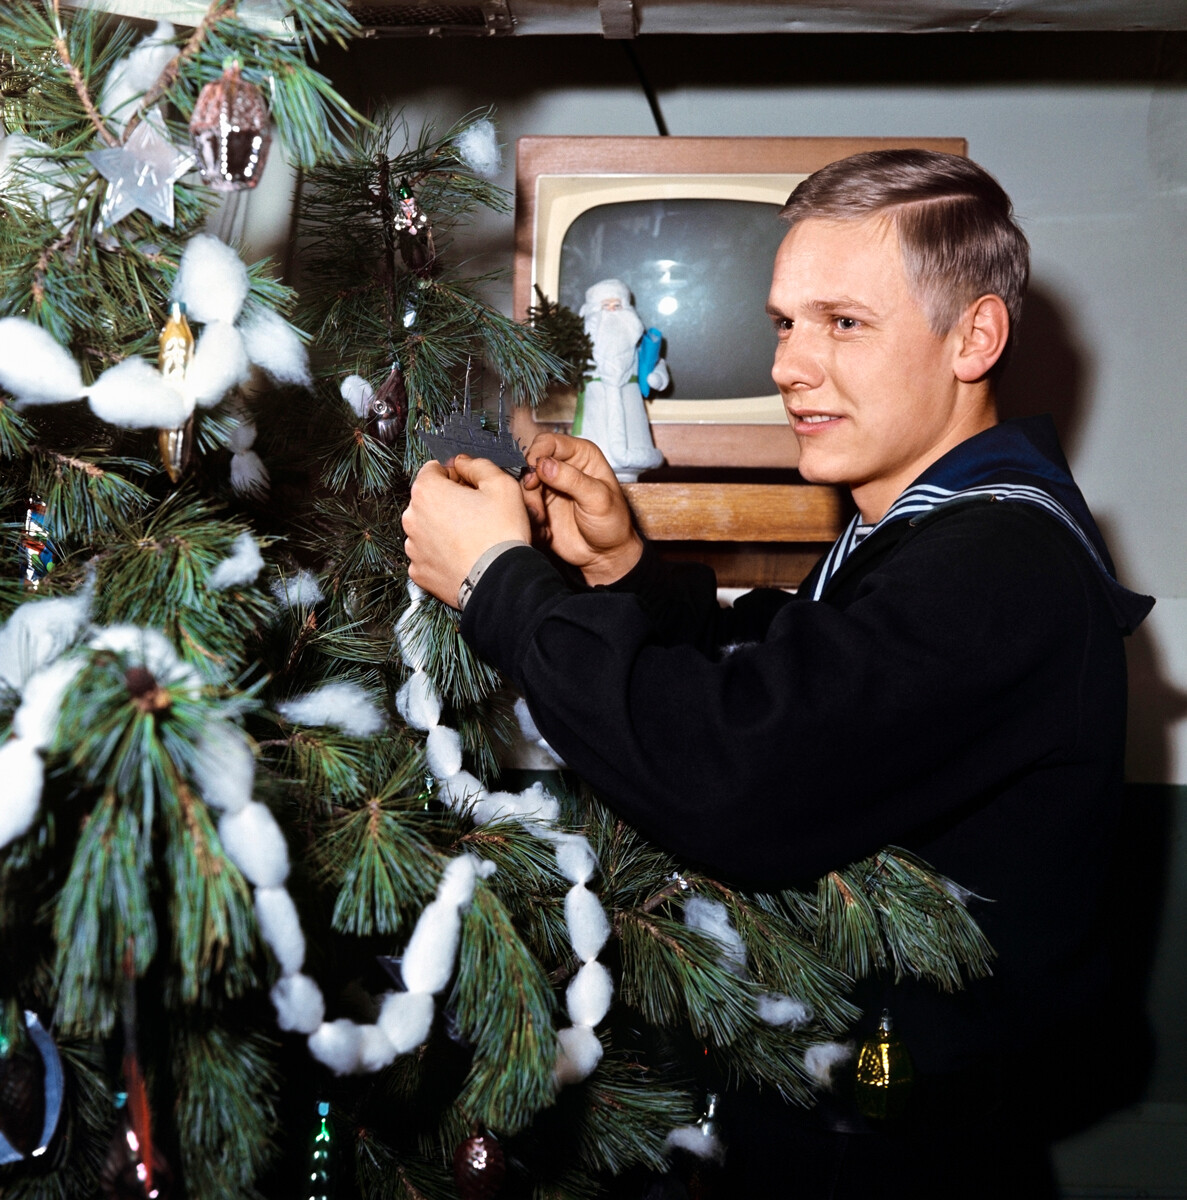 New Year preparations on the border ship, 70s.